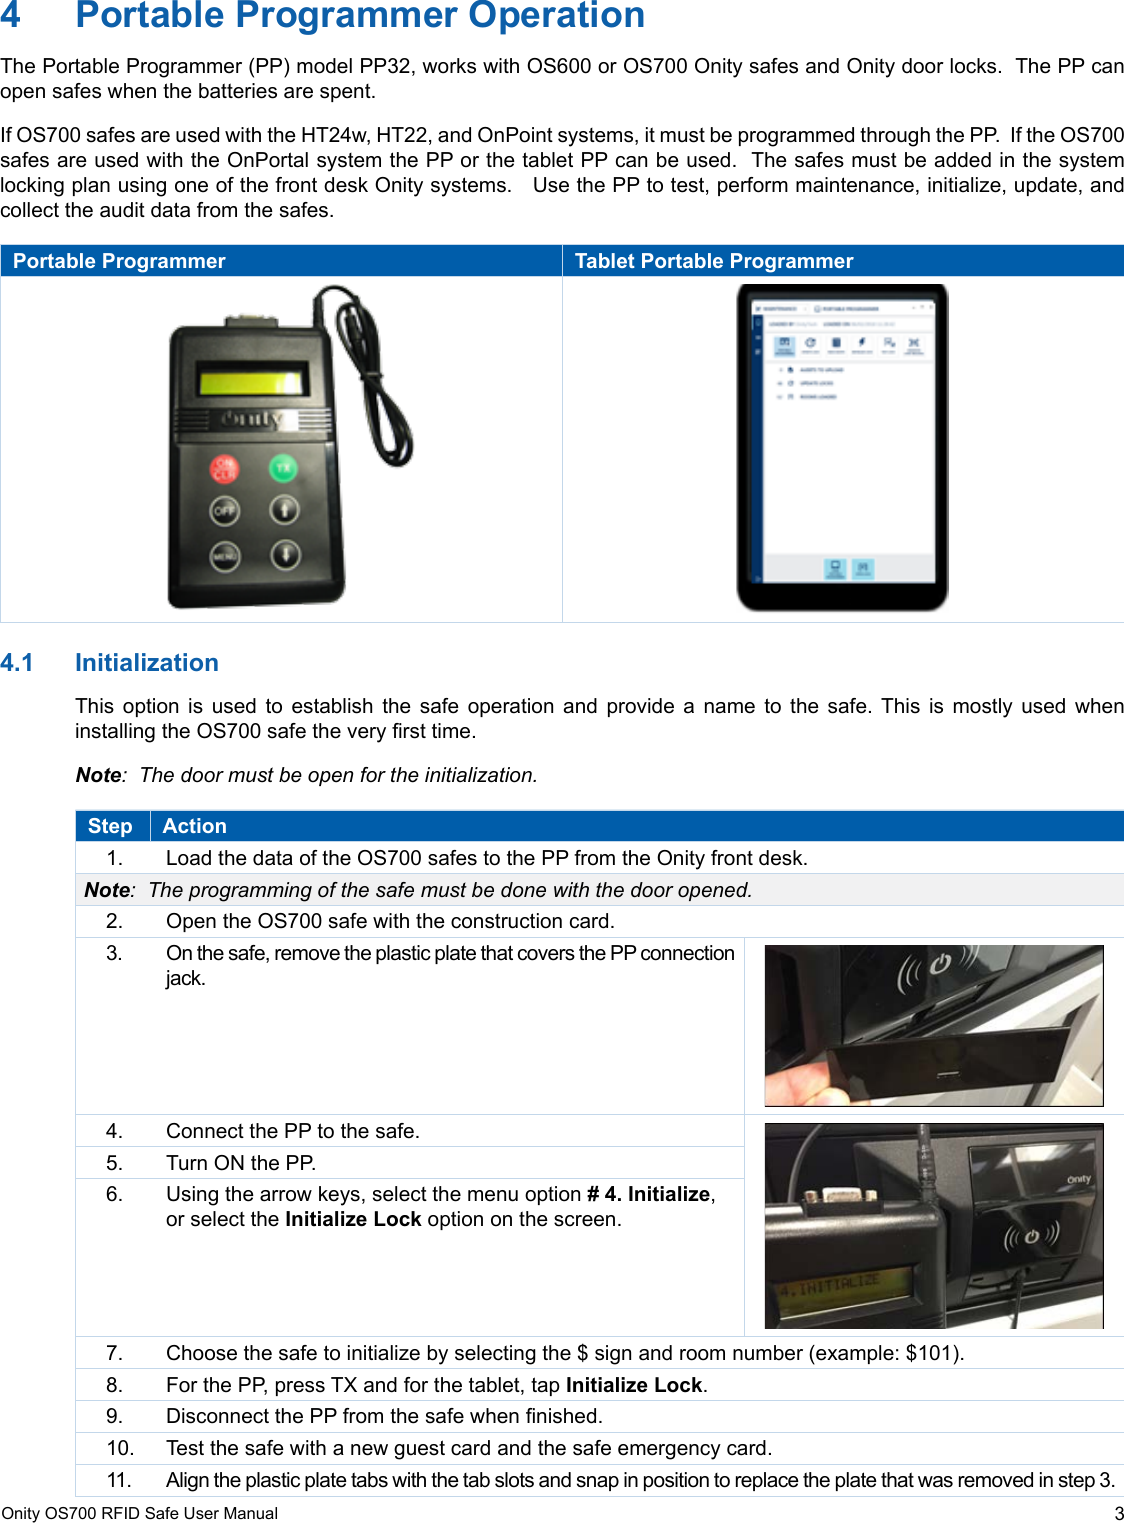 3Onity OS700 RFID Safe User Manual4  Portable Programmer OperationThe Portable Programmer (PP) model PP32, works with OS600 or OS700 Onity safes and Onity door locks.  The PP can open safes when the batteries are spent. If OS700 safes are used with the HT24w, HT22, and OnPoint systems, it must be programmed through the PP.  If the OS700 safes are used with the OnPortal system the PP or the tablet PP can be used.  The safes must be added in the system locking plan using one of the front desk Onity systems.   Use the PP to test, perform maintenance, initialize, update, and collect the audit data from the safes.Portable Programmer Tablet Portable Programmer4.1  InitializationThis option is used to establish the safe operation and provide a name to the safe. This is mostly used when installing the OS700 safe the very rst time.   Note:  The door must be open for the initialization.Step Action1.  Load the data of the OS700 safes to the PP from the Onity front desk.Note:  The programming of the safe must be done with the door opened.2.  Open the OS700 safe with the construction card. 3.  On the safe, remove the plastic plate that covers the PP connection jack.4.  Connect the PP to the safe.5.  Turn ON the PP. 6.  Using the arrow keys, select the menu option # 4. Initialize, or select the Initialize Lock option on the screen. 7.  Choose the safe to initialize by selecting the $ sign and room number (example: $101).8.  For the PP, press TX and for the tablet, tap Initialize Lock.9.  Disconnect the PP from the safe when nished.10.  Test the safe with a new guest card and the safe emergency card.11.  Align the plastic plate tabs with the tab slots and snap in position to replace the plate that was removed in step 3.